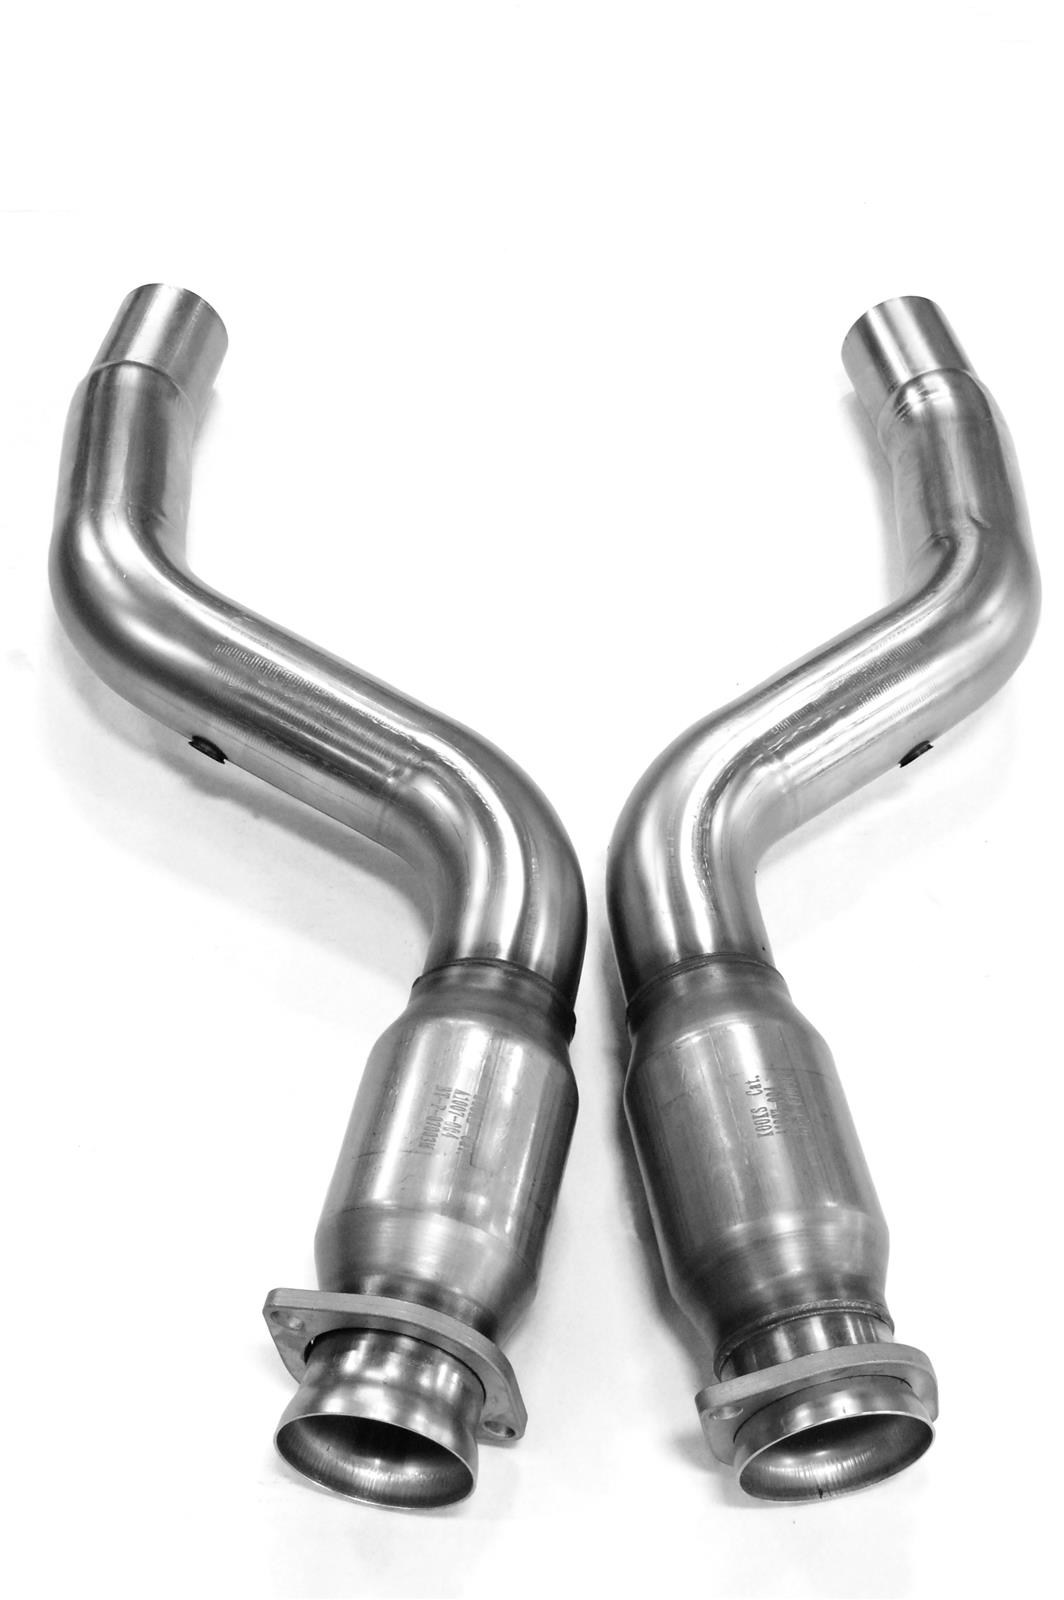 Kooks 06-10 Dodge Charger SRT8 3in In x 3in Out Cat SS Conn. Pipes